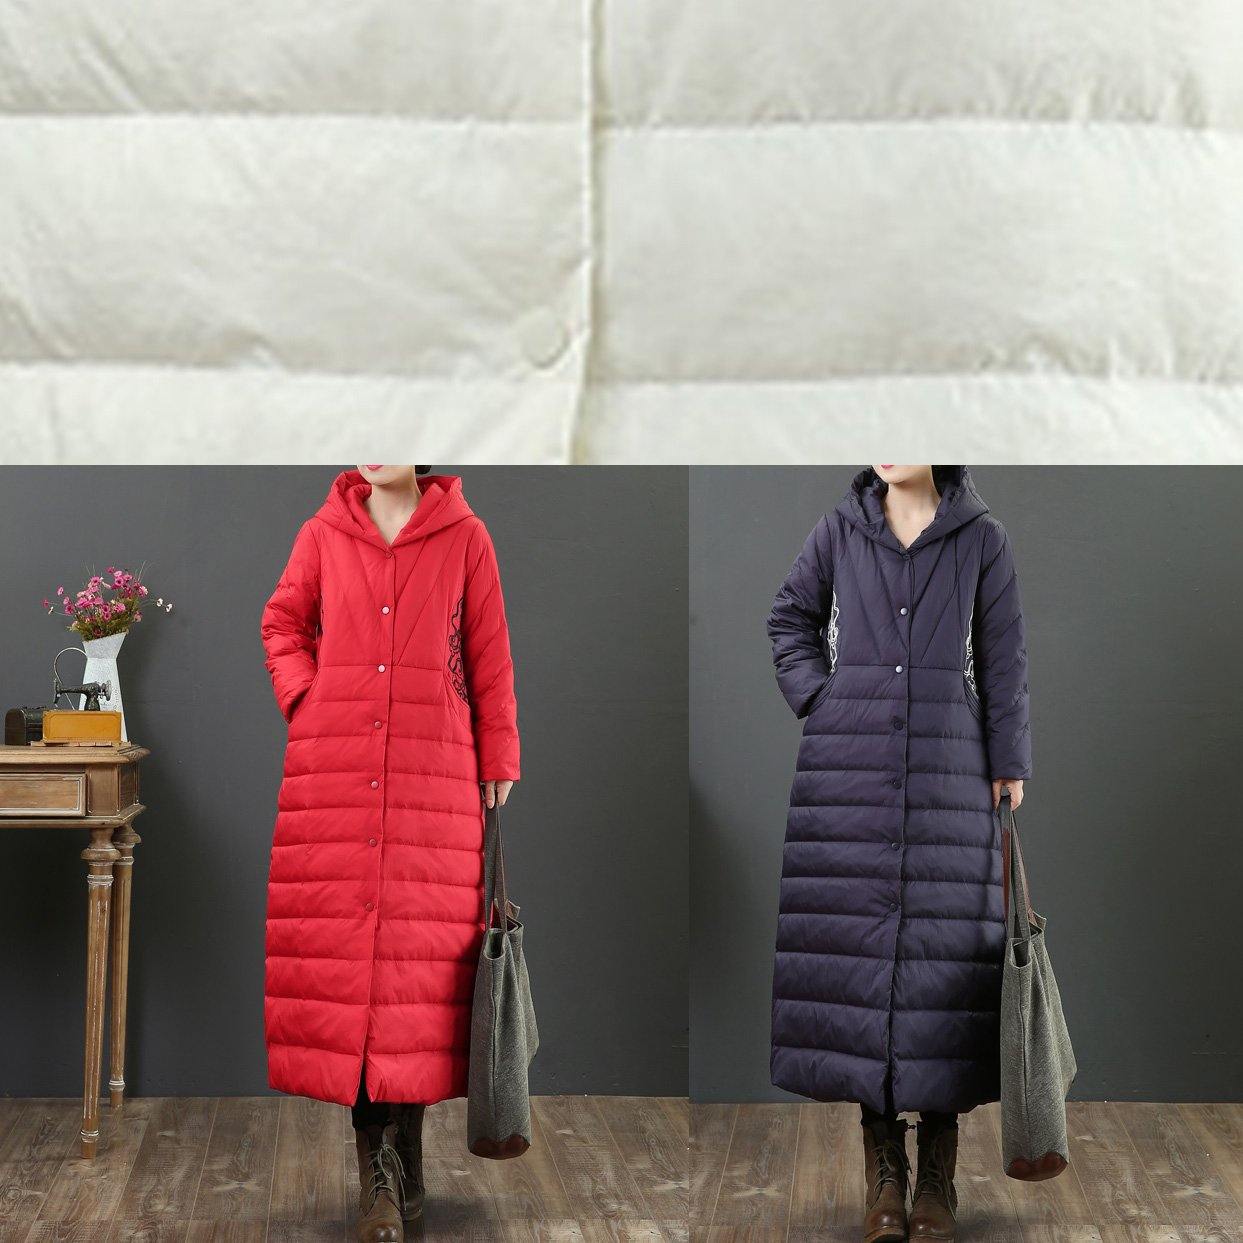 New navy thick casual outfit oversize Jackets & Coats embroidery hooded winter outwear - Omychic